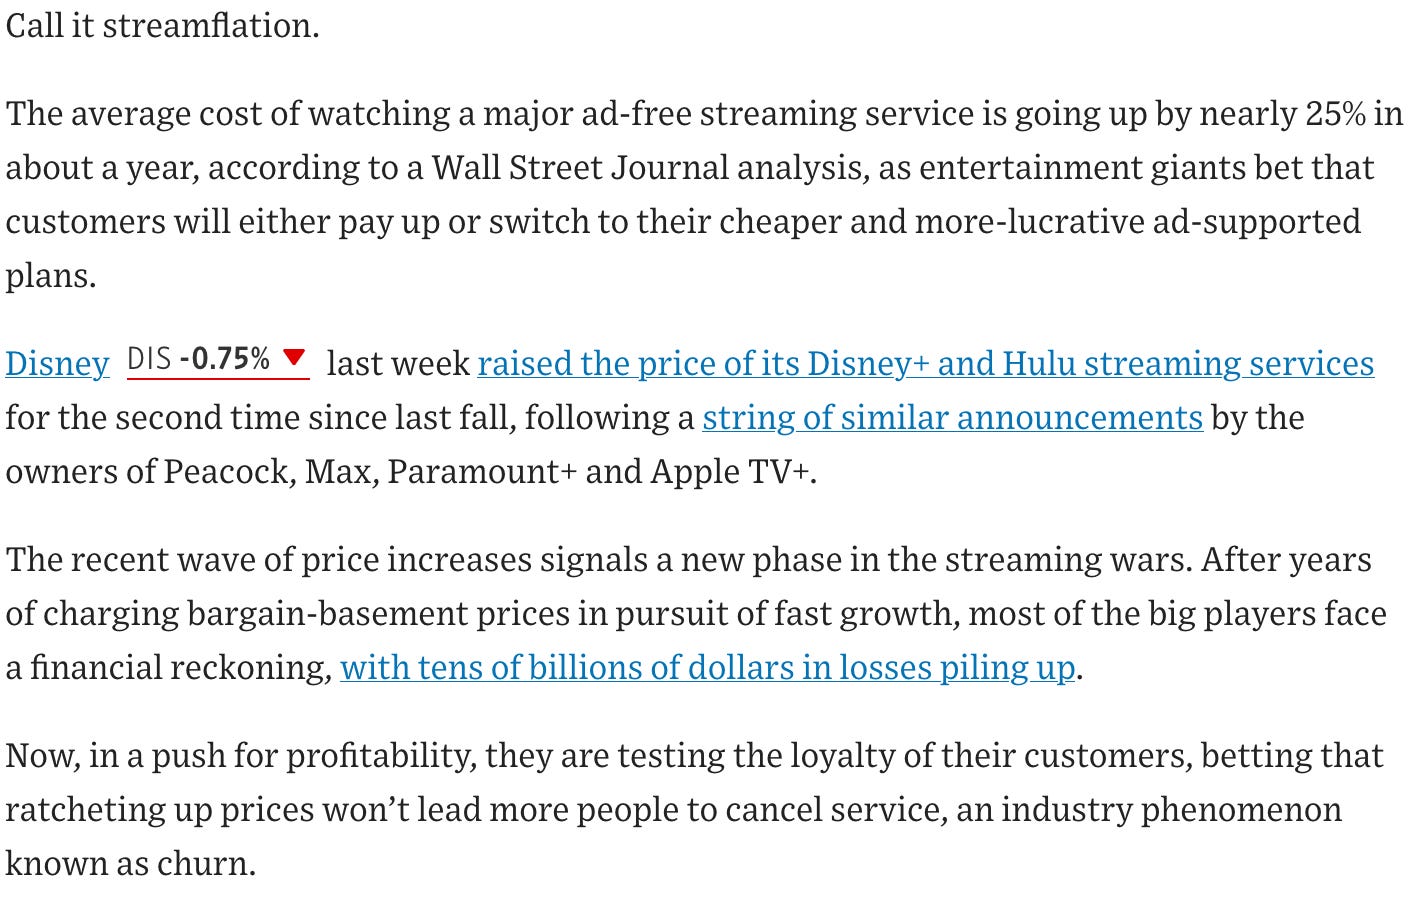 Apple and Paramount discuss bundling streaming services, according to WSJ, Equity Research